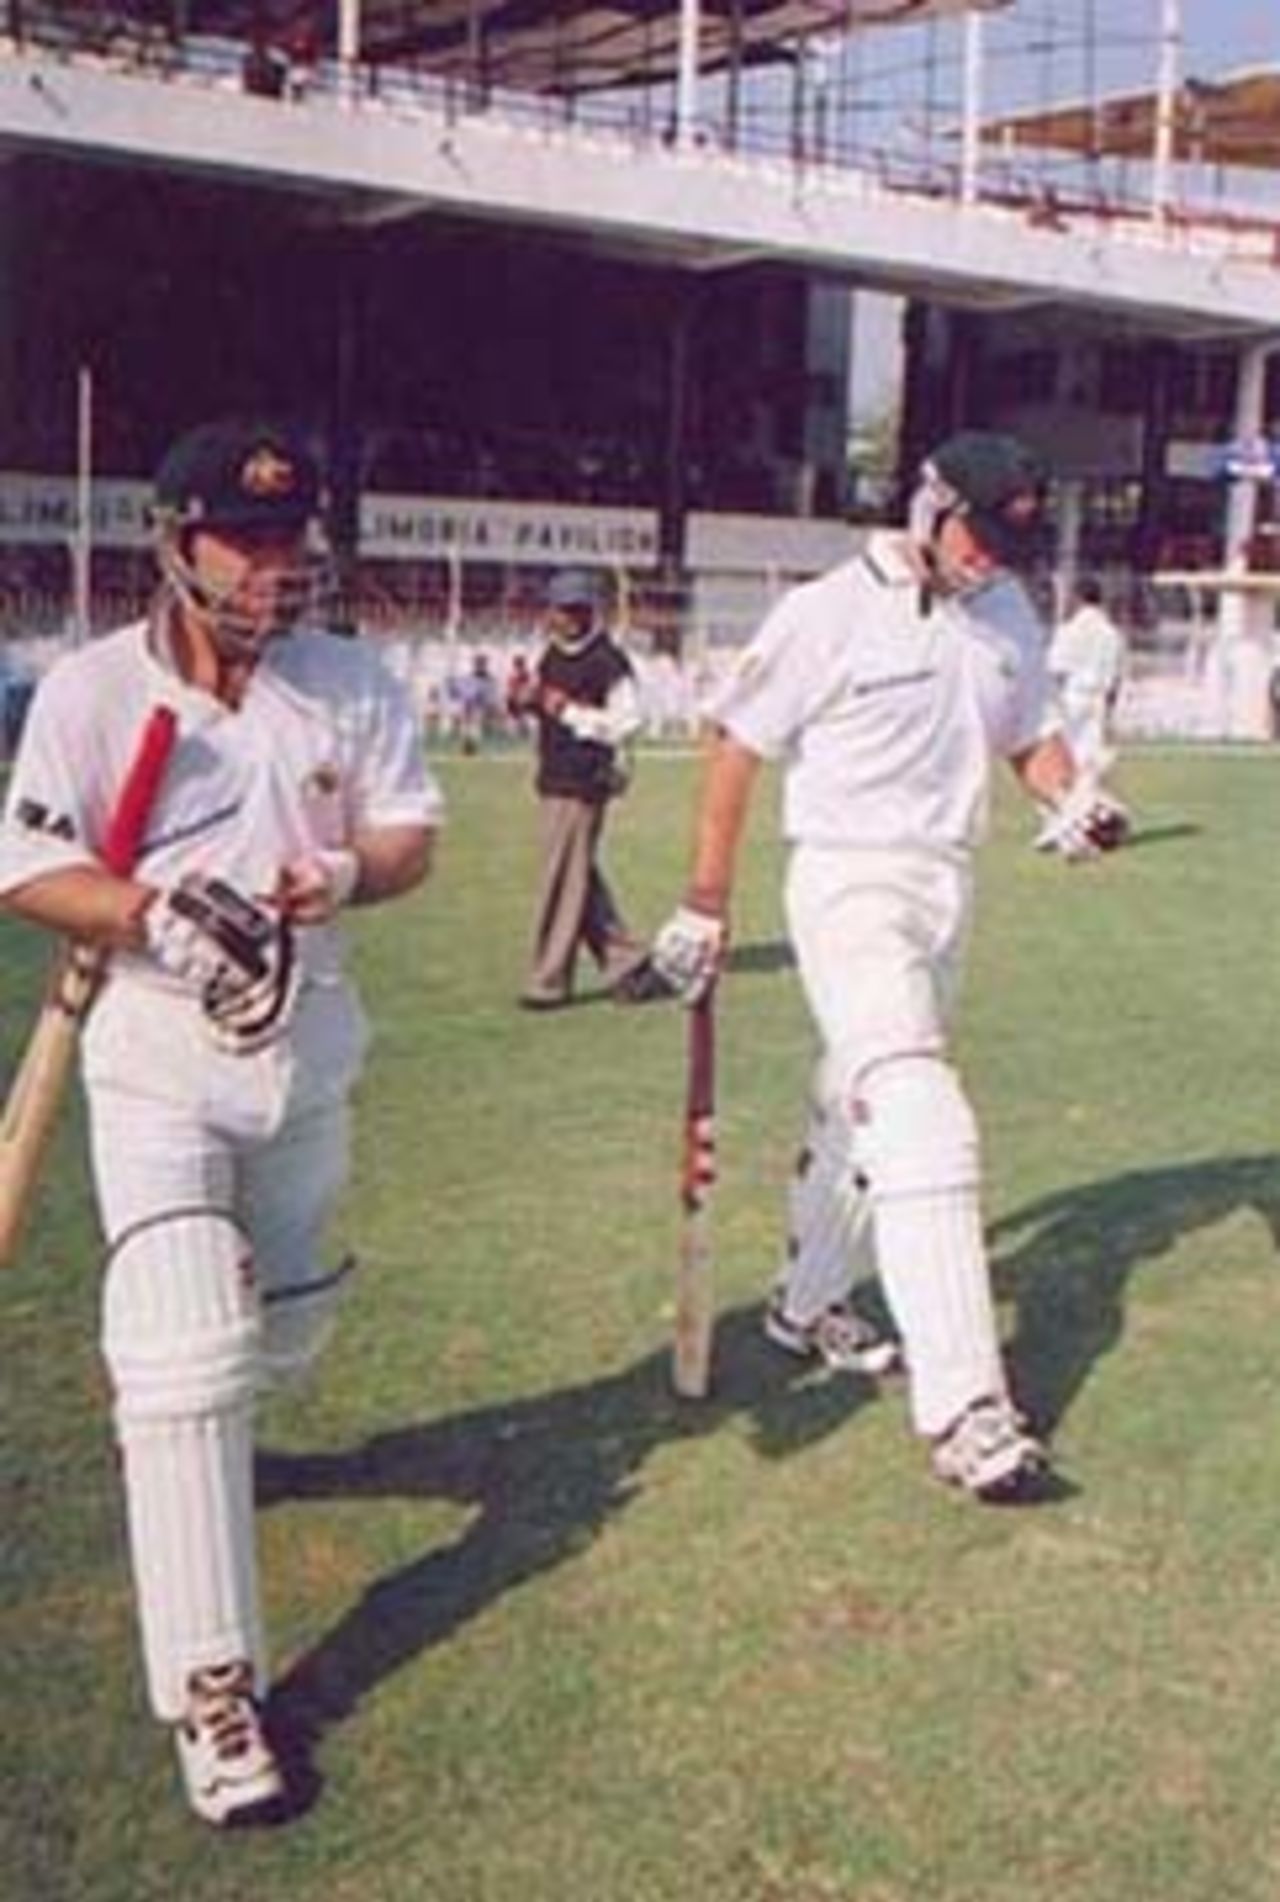 Slater and Hayden walk out against India A to kick off the Australian tour , Australia in India 2000/01, India 'A' v Australia, Vidarbha C.A. Ground, Nagpur, 17-19 Feb 2001 (Day 1)